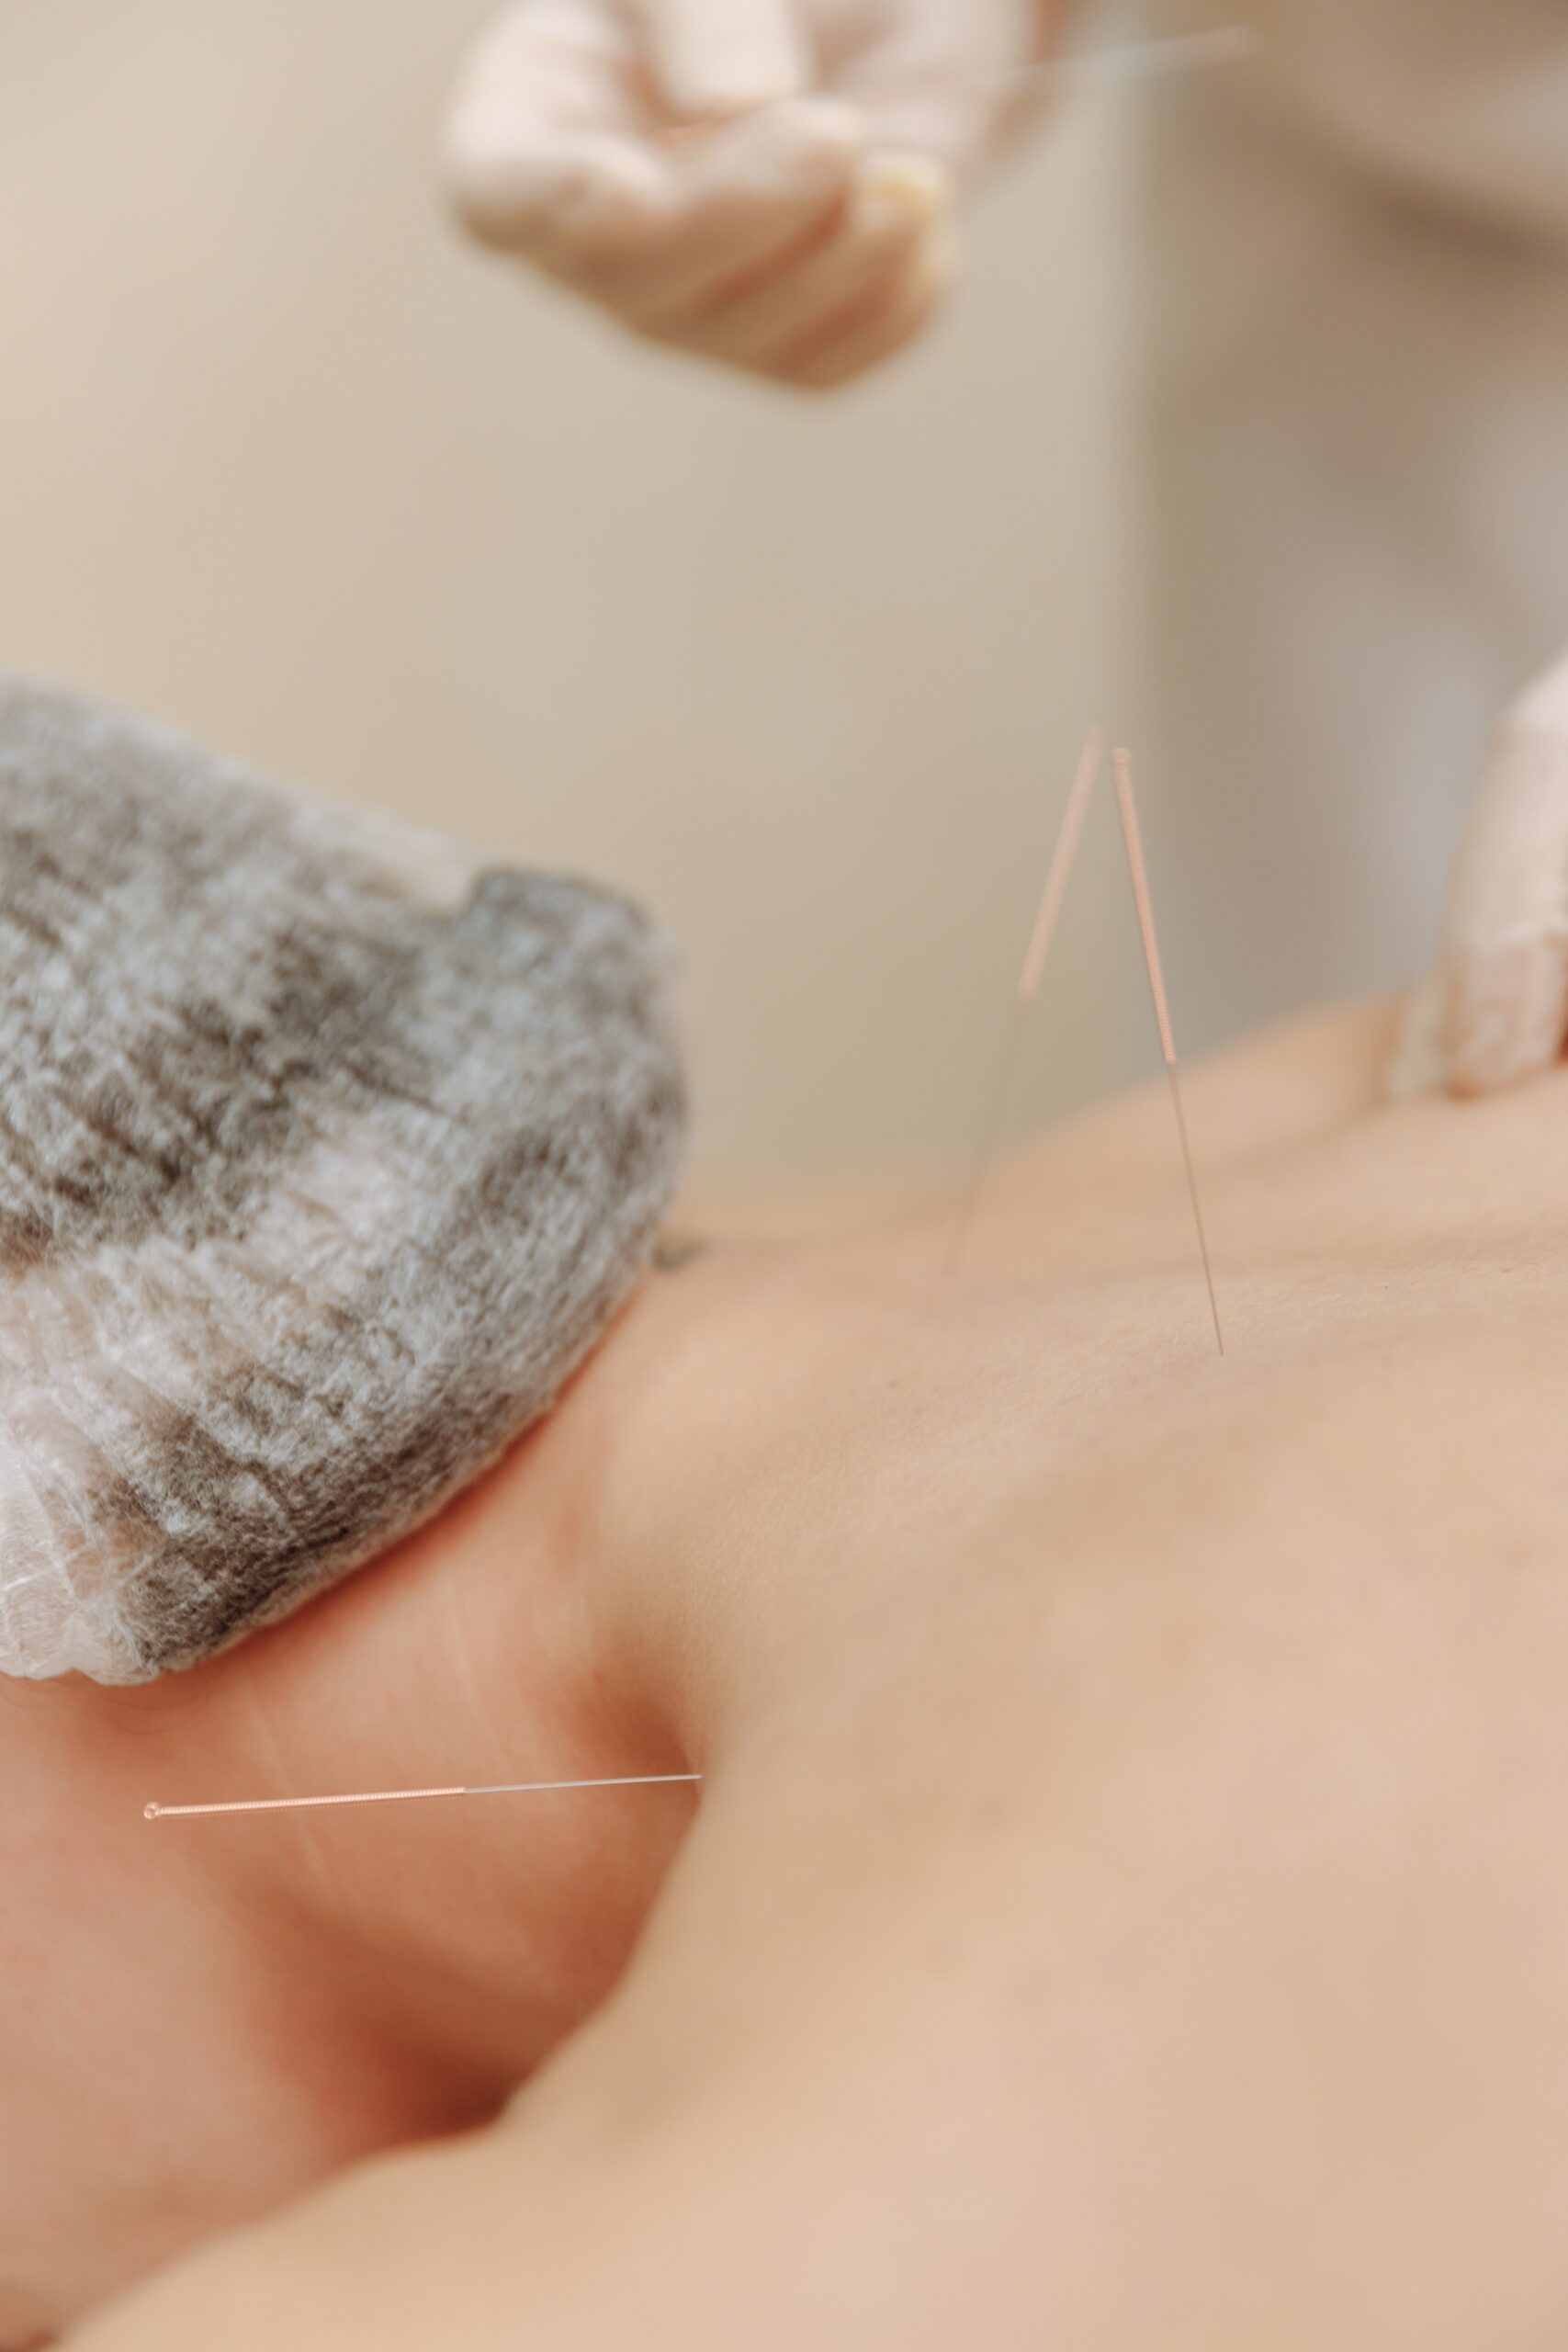 HOW TO USE ACUPUNCTURE FOR MENISCUS TEAR PAIN RELIEF